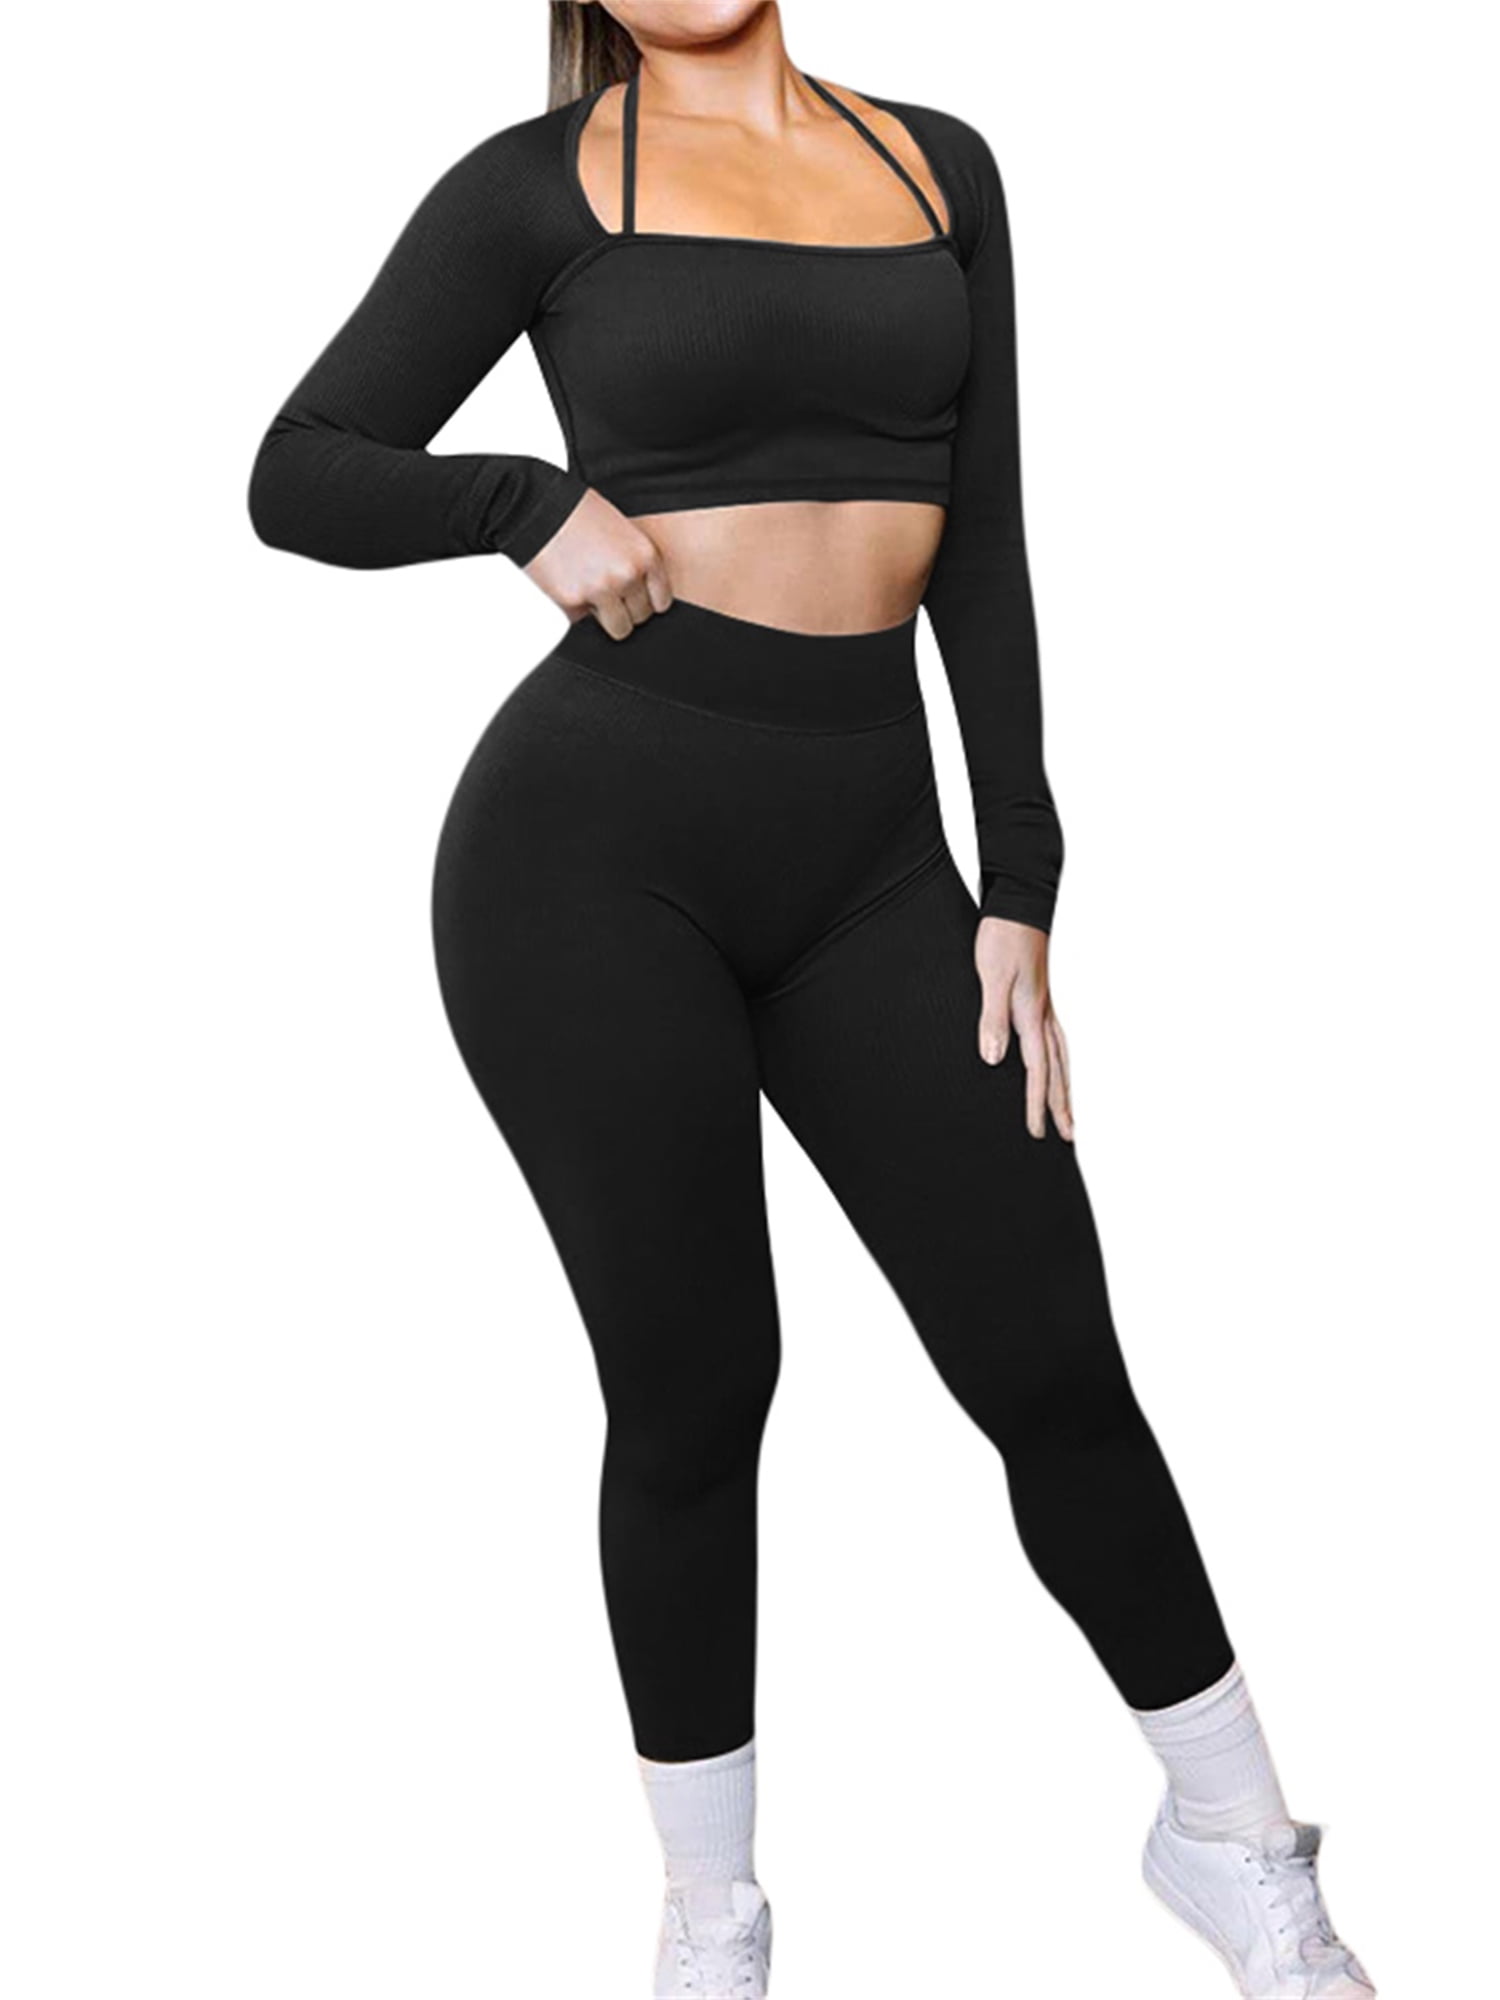 Peyakidsaa Women 2 Piece Workout Outfits Seamless Long Sleeve Crop Top Leggings  Sports Yoga Exercise Sets 